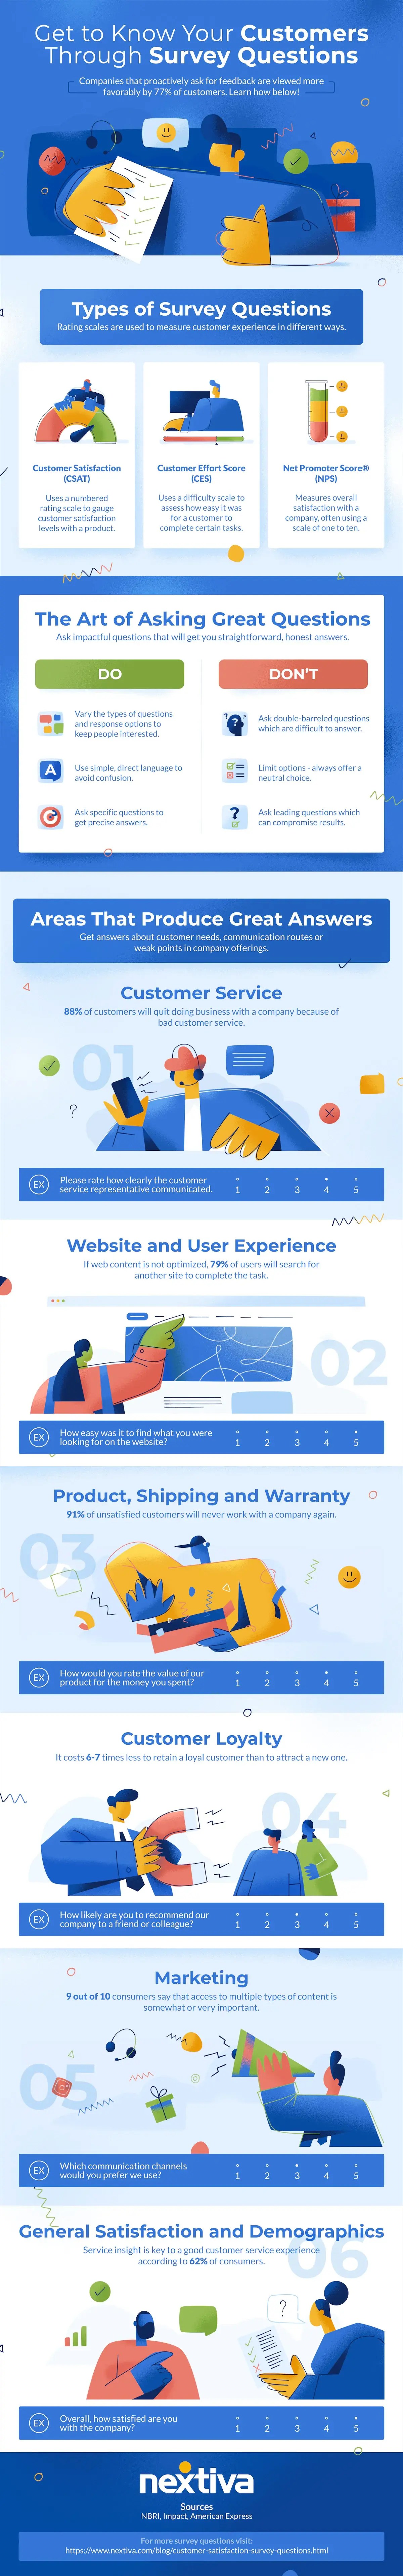 Infographic on getting to know your customers through survey questions. 